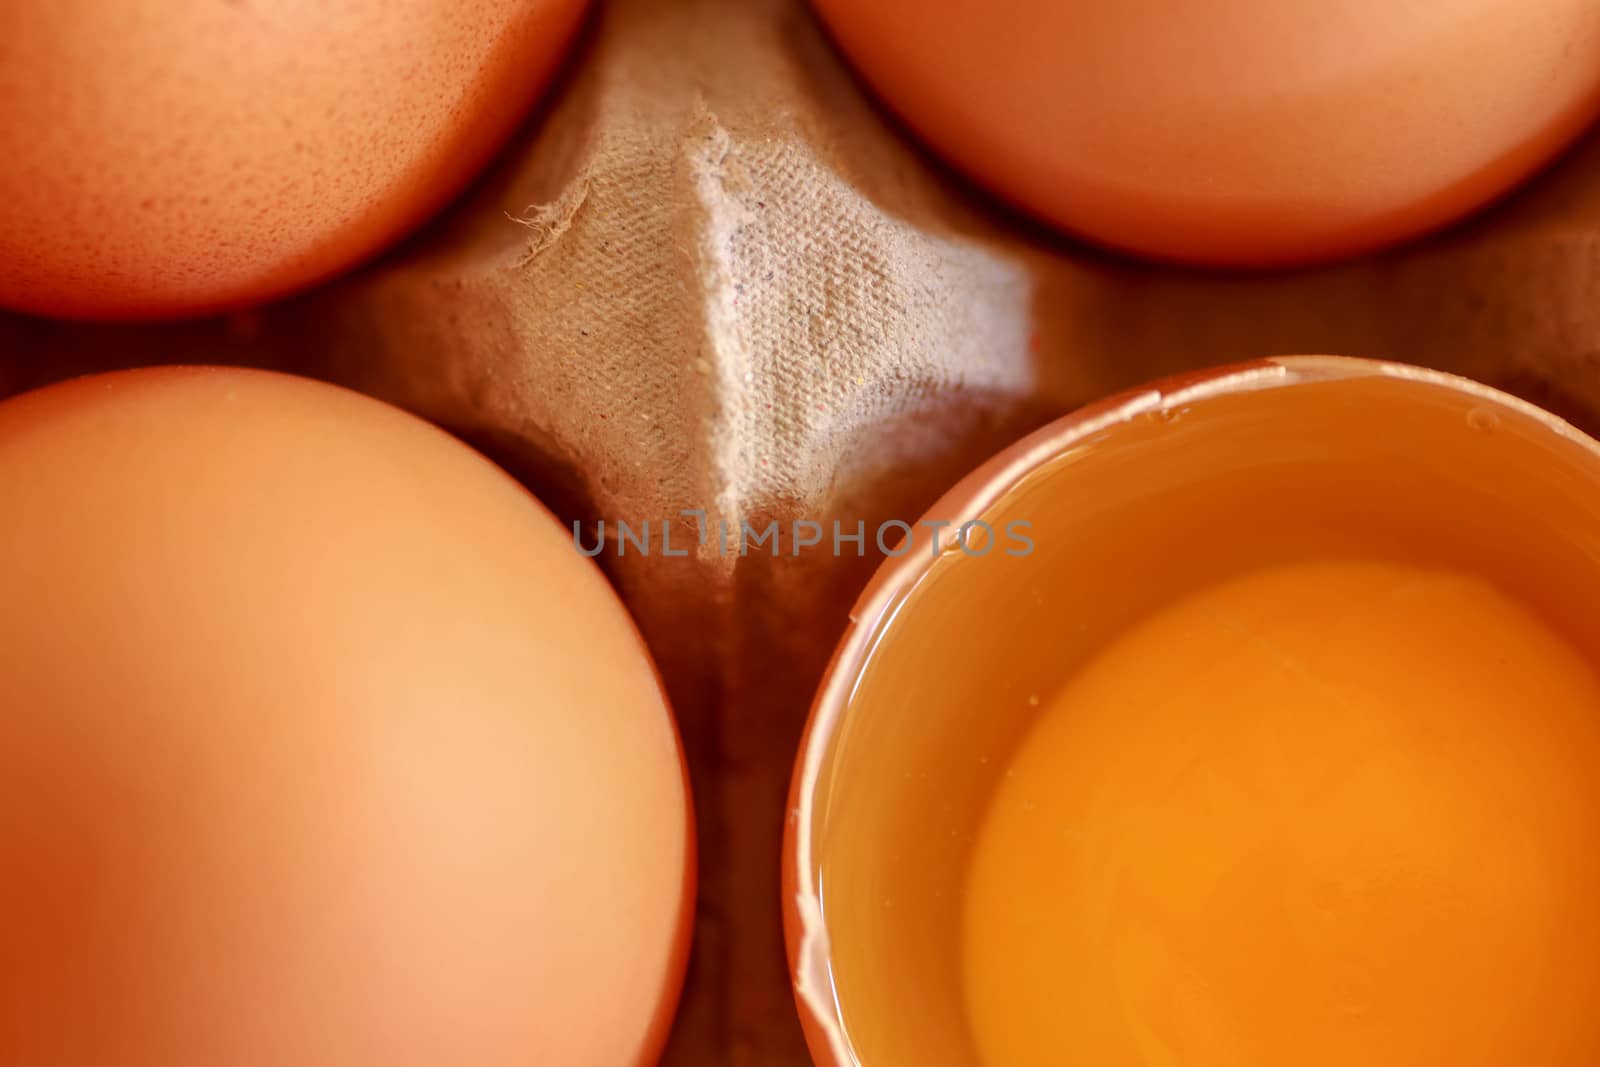 tray of raw eggs on background. Top view by Sanatana2008